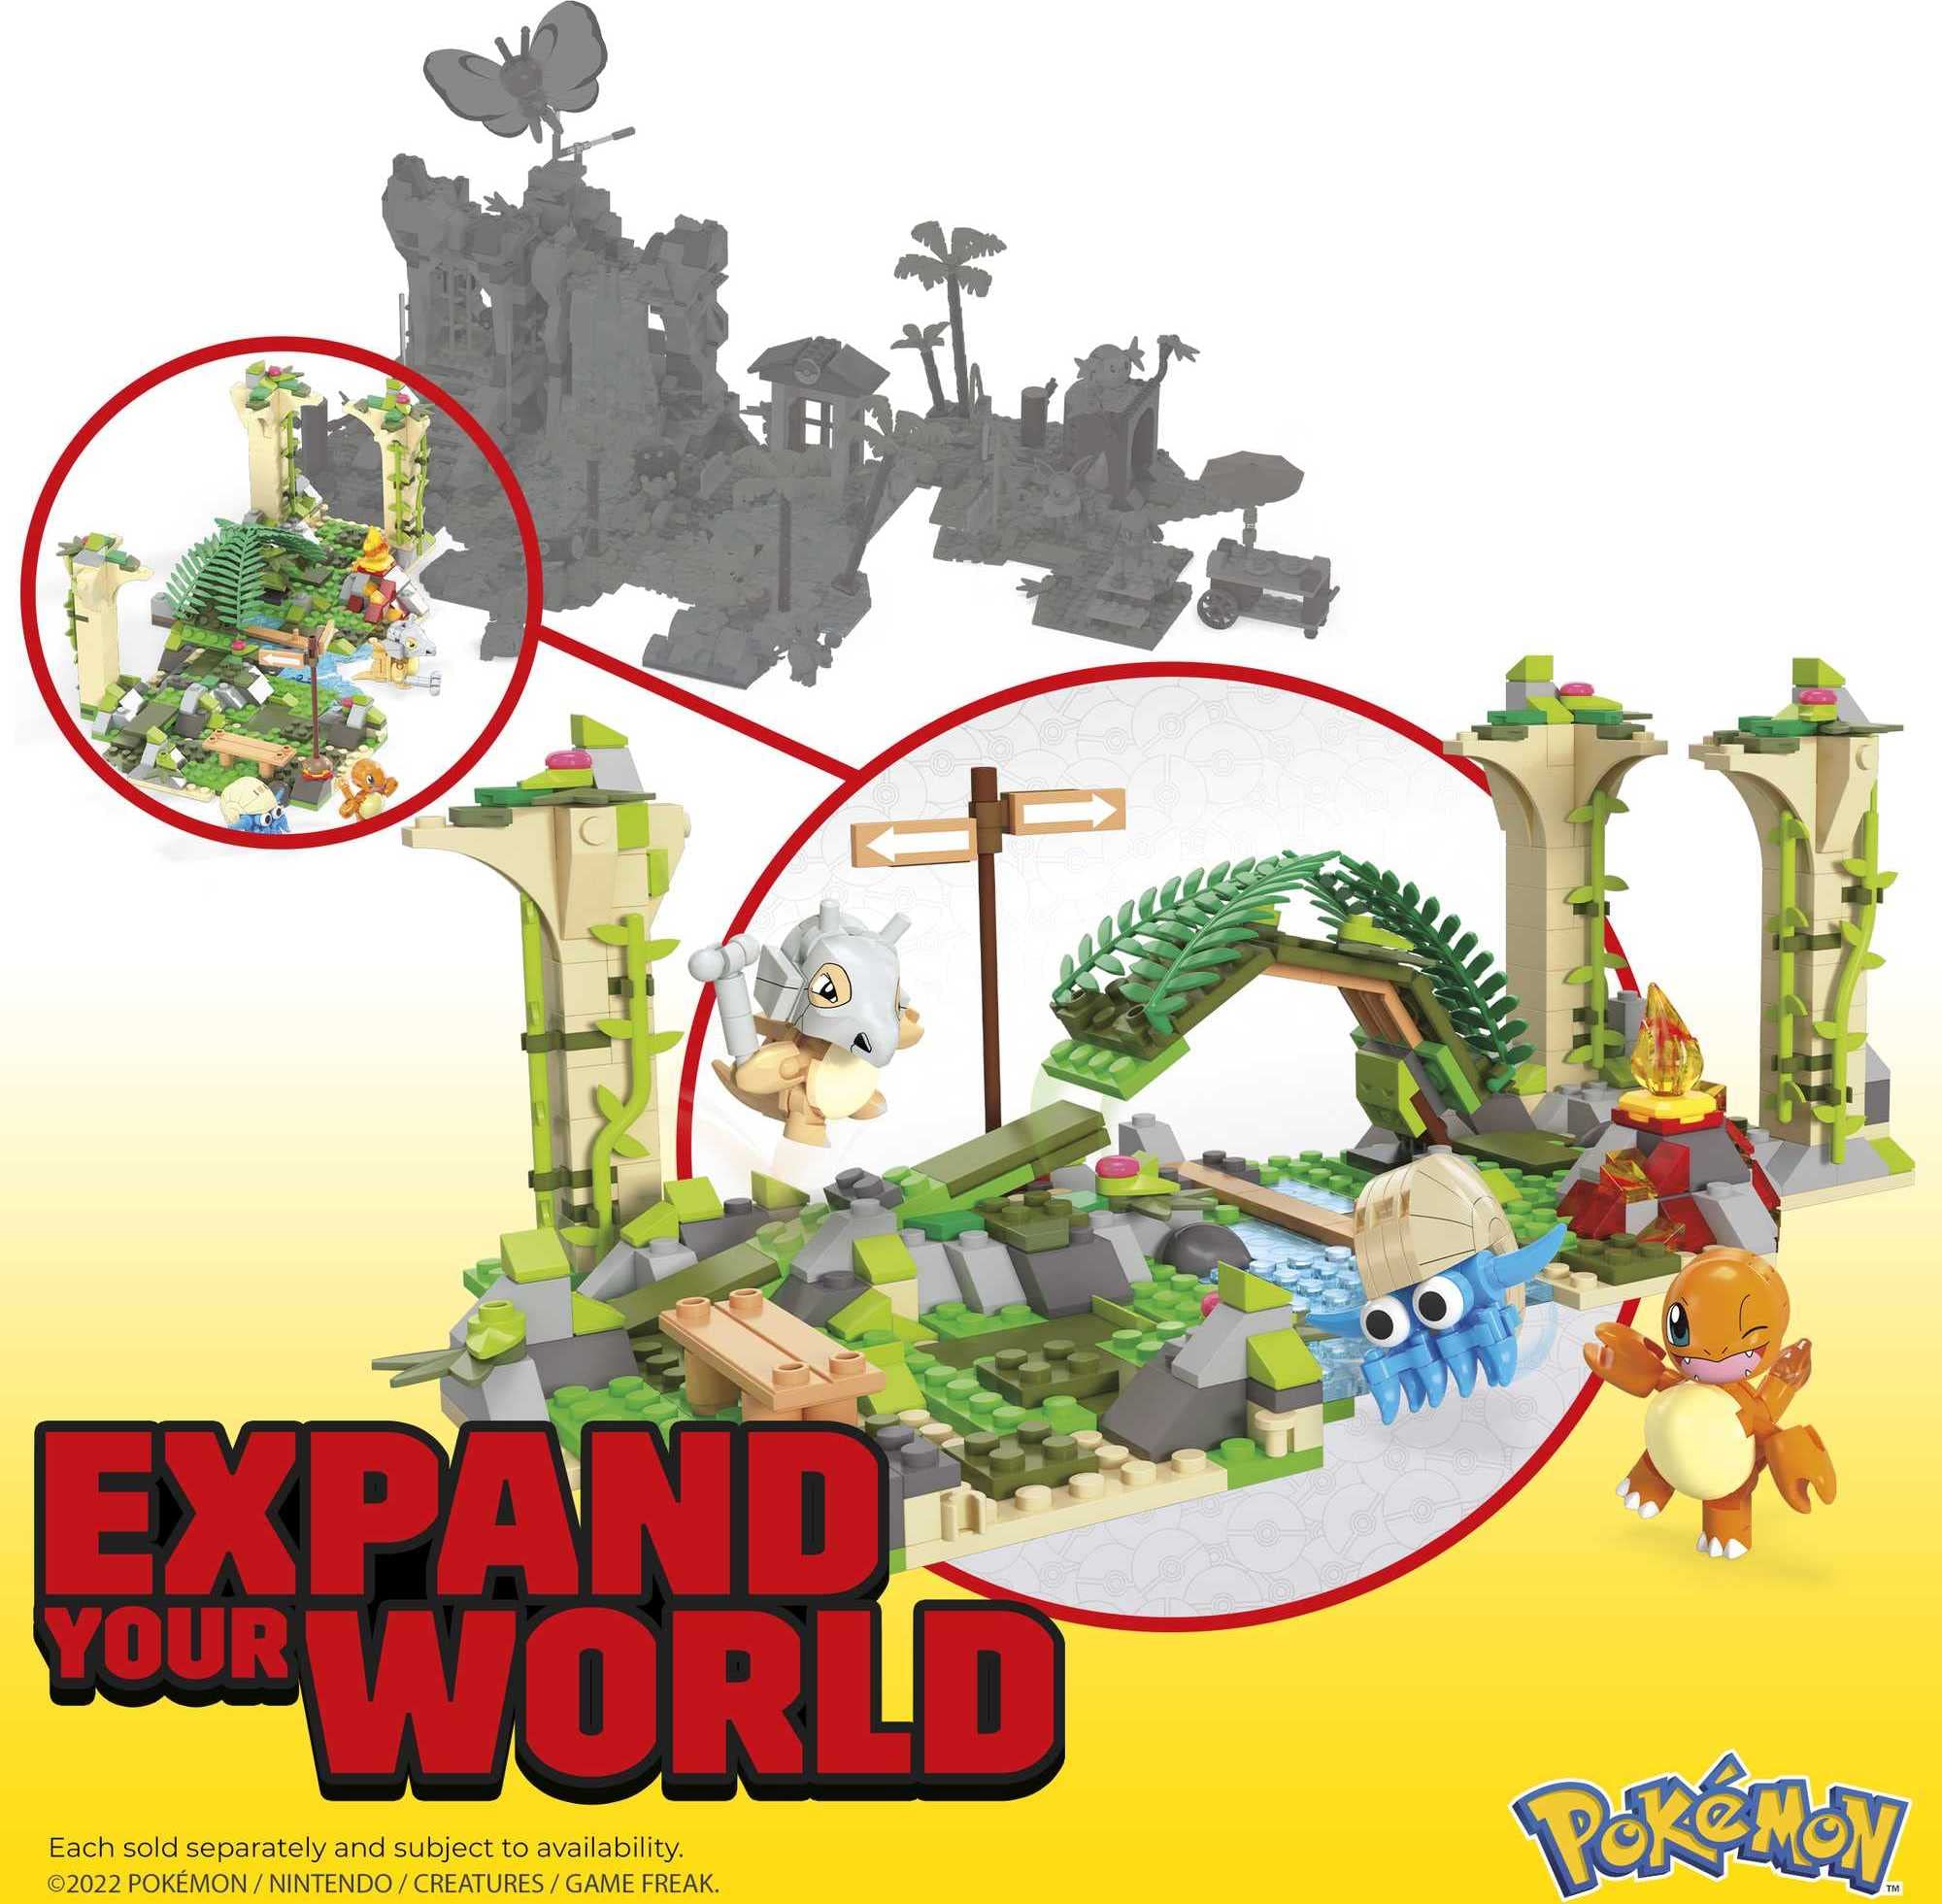 MEGA Pokémon Action Figure Building Toy, Jungle Ruins with 464 Pieces, Motion and 3 Characters, Cubone Charmander Omanyte, Gift Idea for Kids